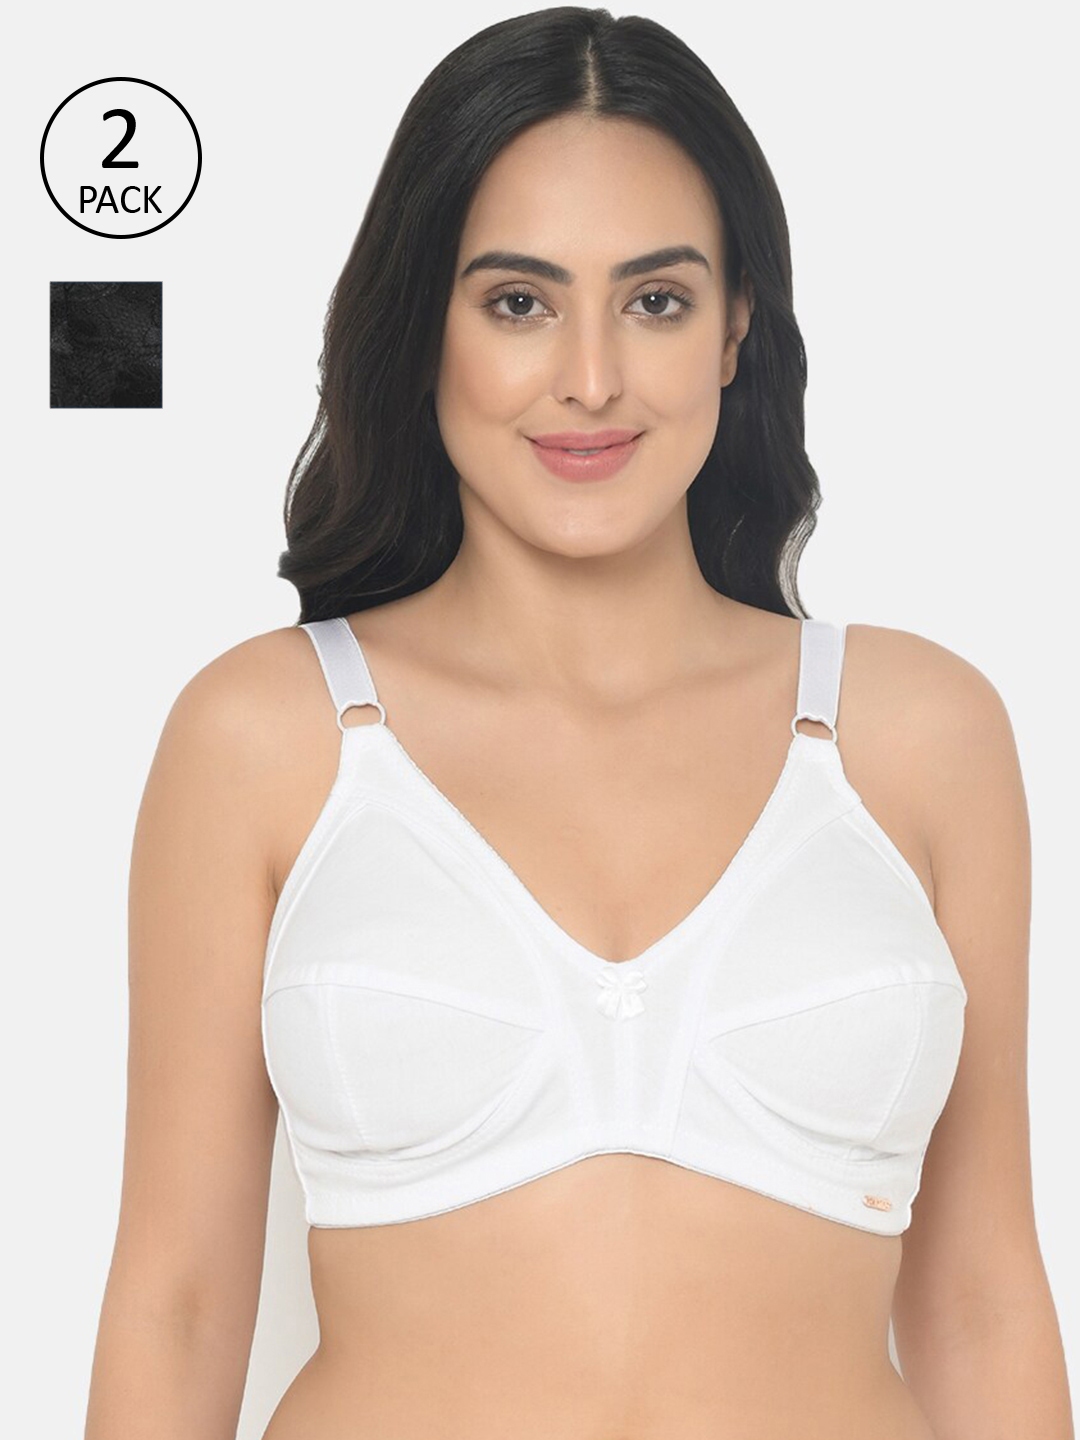 Buy Curvy Love Pack Of 2 Full Coverage Plus Size Everyday Bras CL